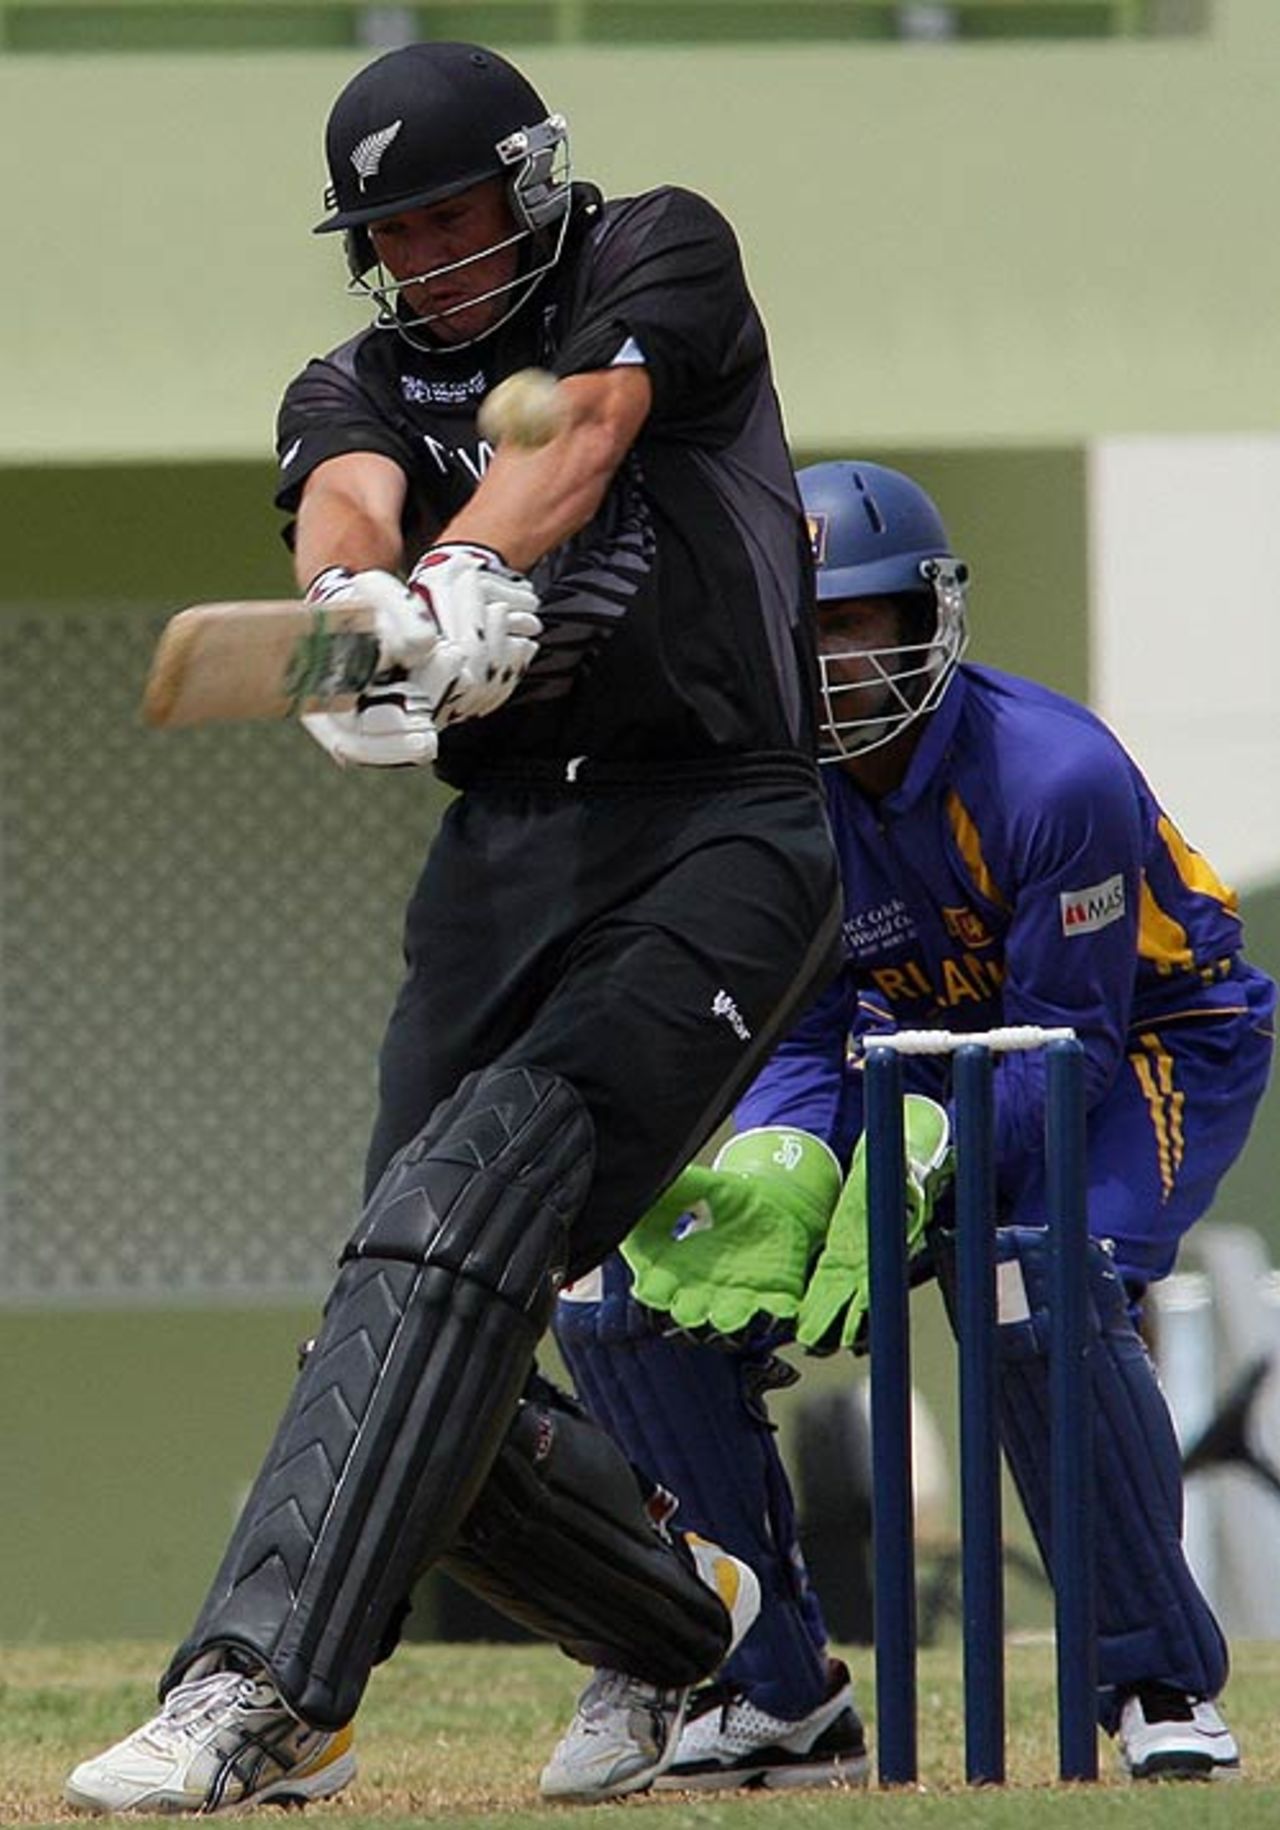 Peter Fulton belts a boundary during his 59, New Zealand v Sri Lanka, 2007 World Cup warm-up, Bridgetown, March 9, 2007